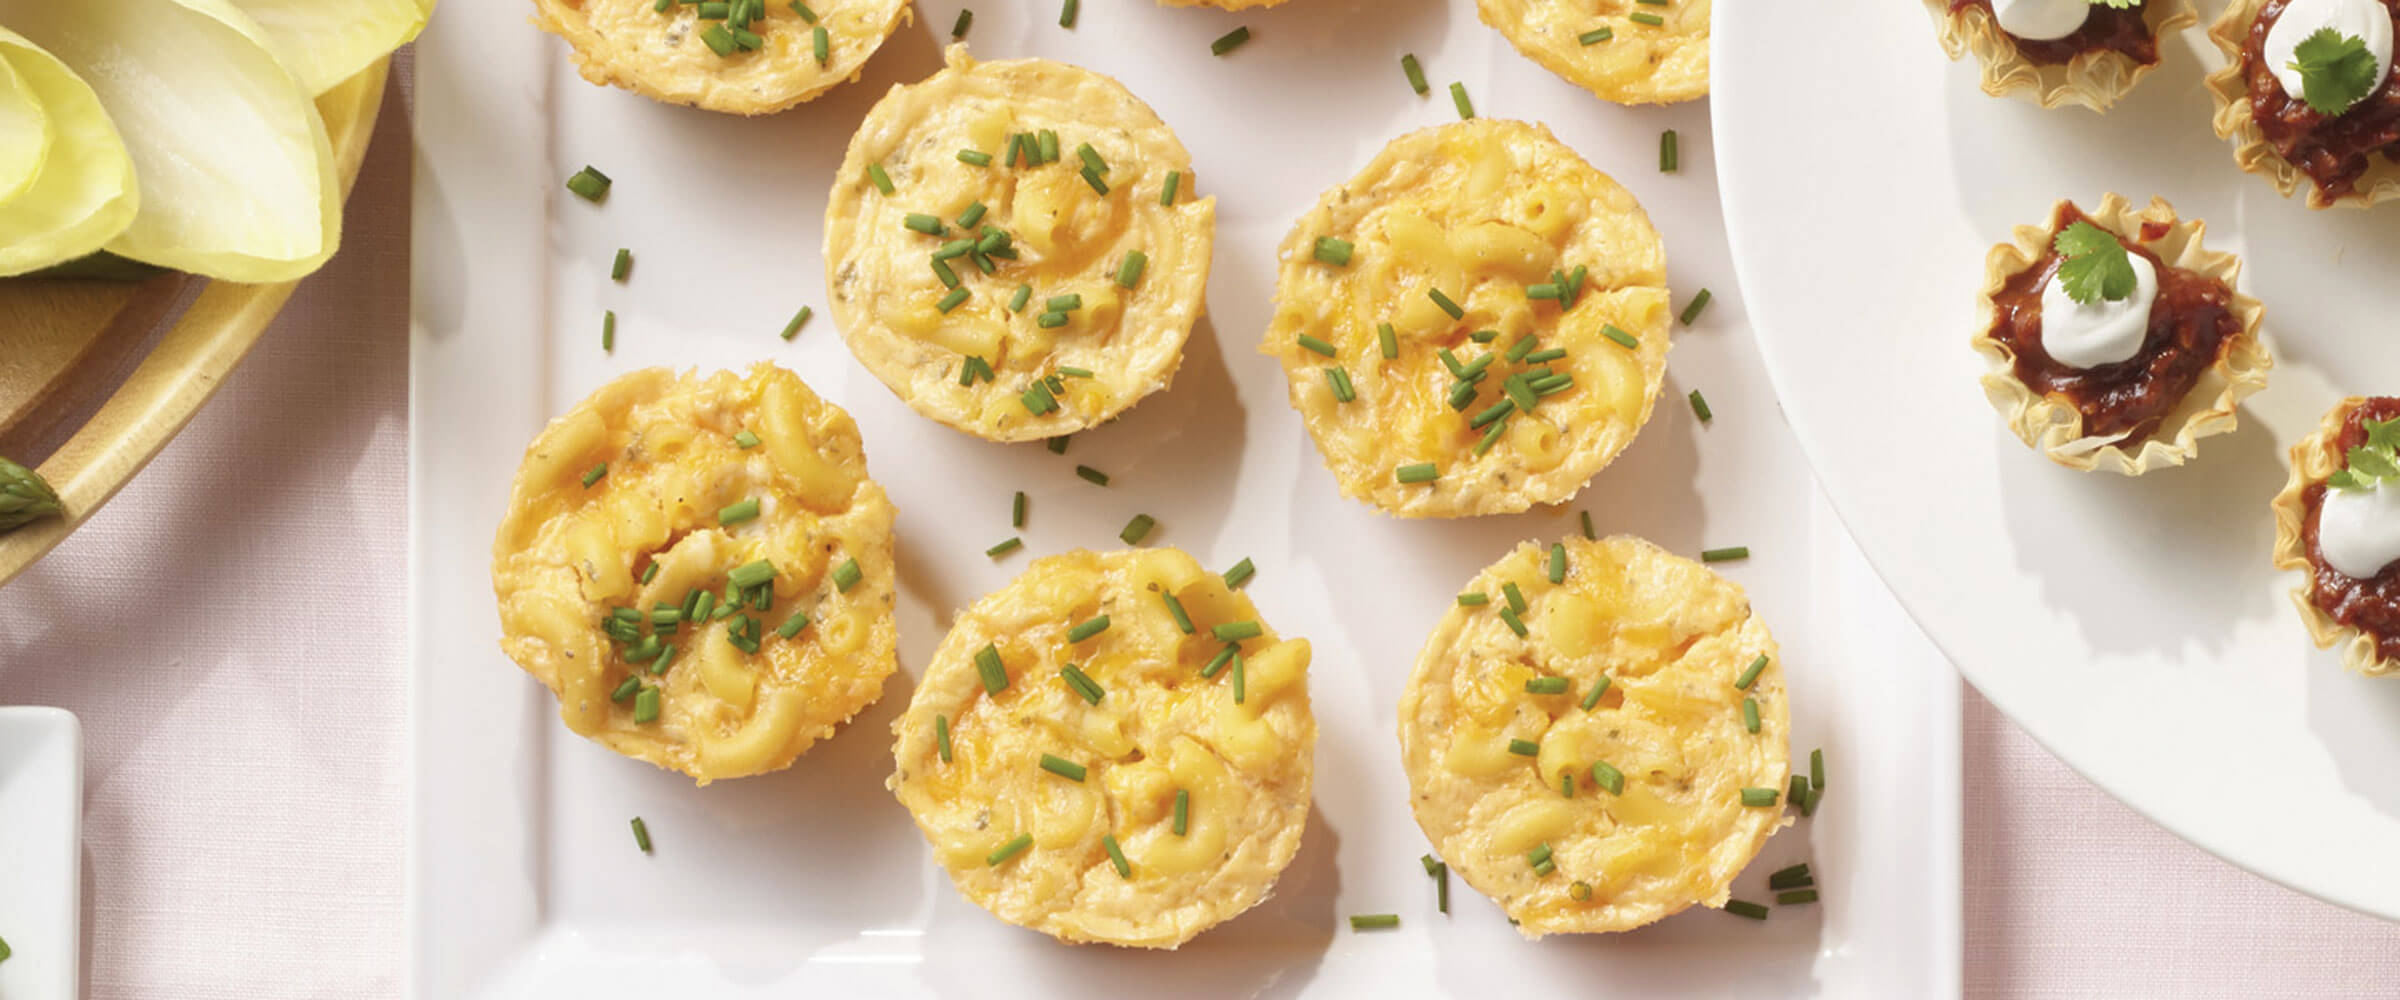 Macaroni and Cheese Cups topped with chives on white platter